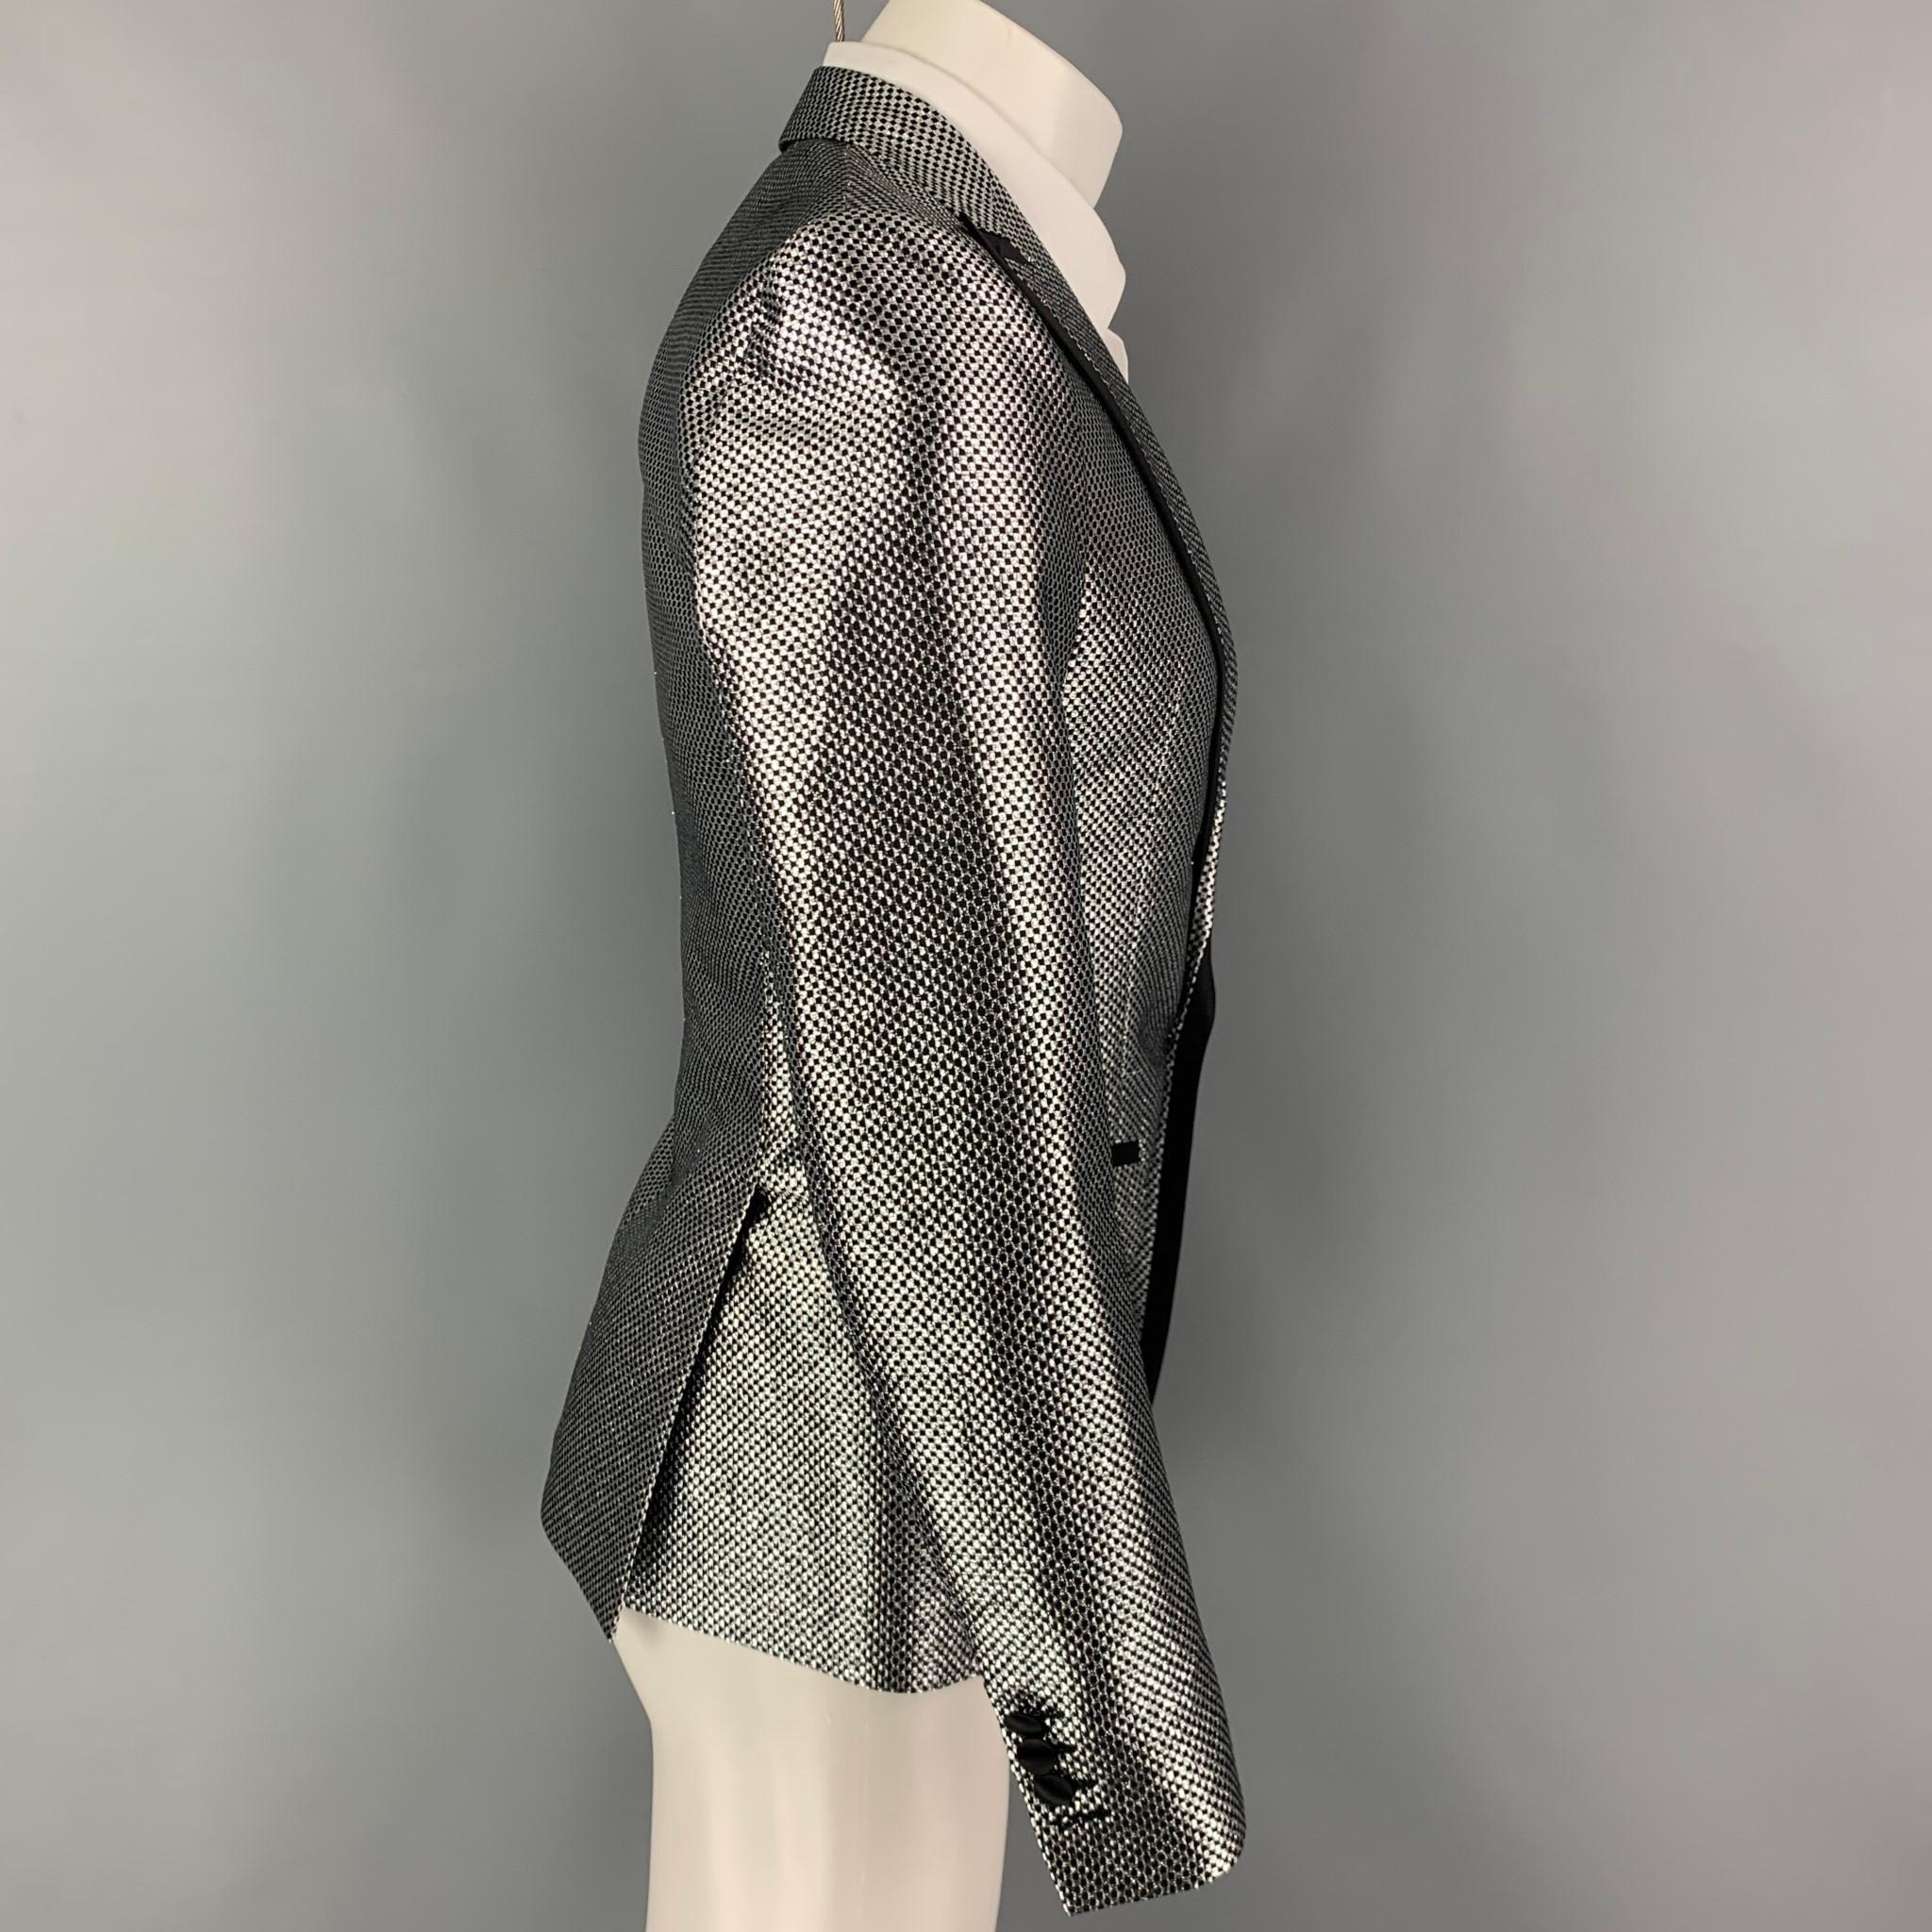 DSQUARED2 sport coat comes in a silver & black checkered polyester / silk with a full liner featuring a peak lapel, flap pockets, double back vent, and a single button closure. Made in Italy. 

Excellent Pre-Owned Condition.
Marked: